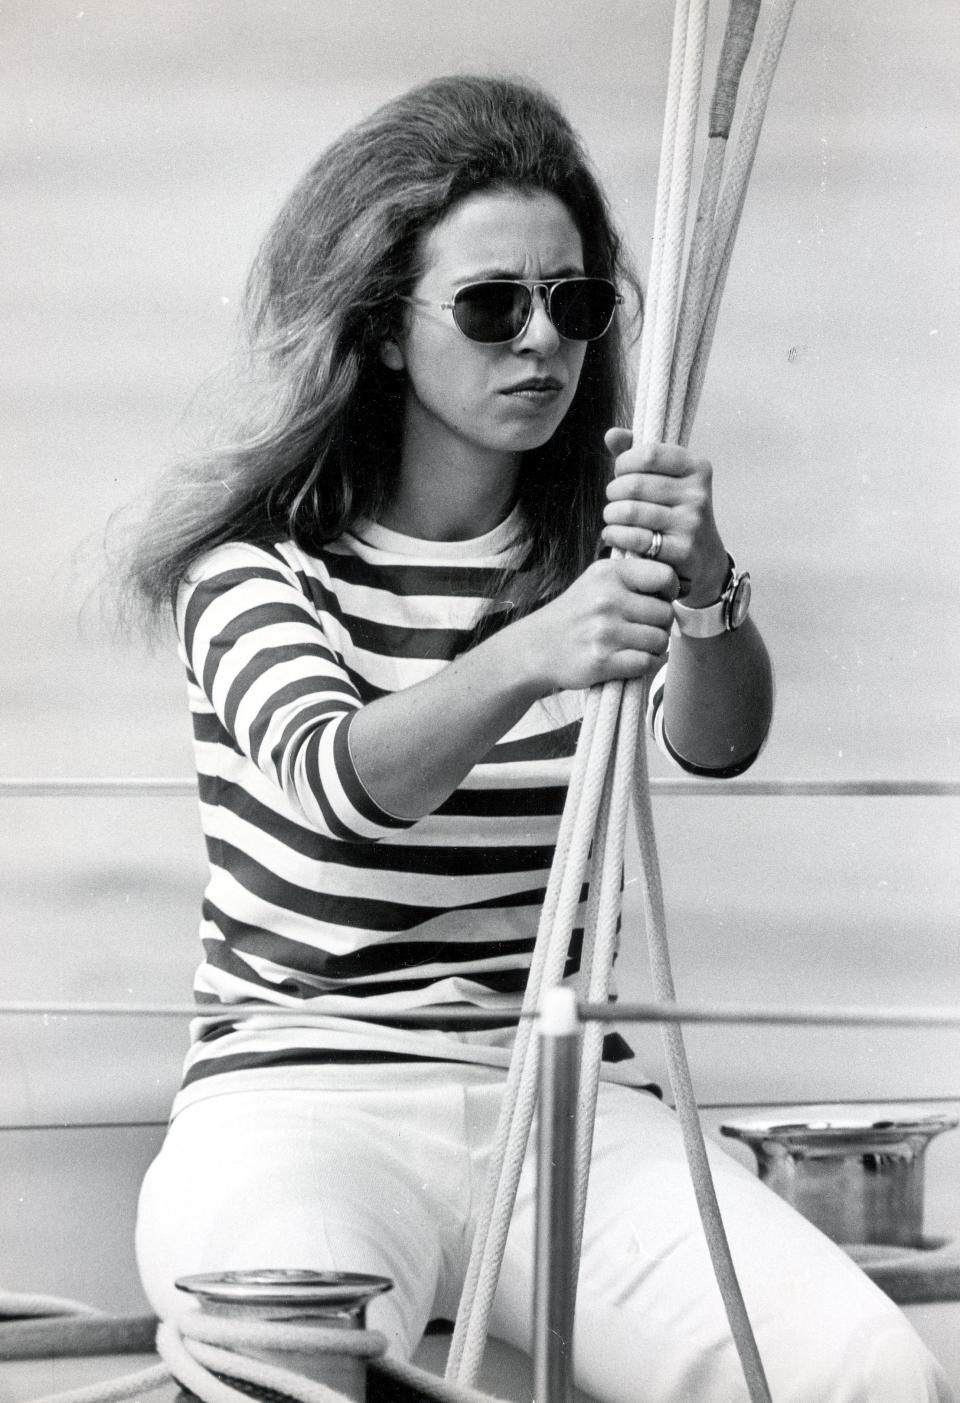 Princess Anne sailing with her father, Prince Philip, during the Britannia Cup in 1970Bill Cross/Daily Mail/Shutterstock